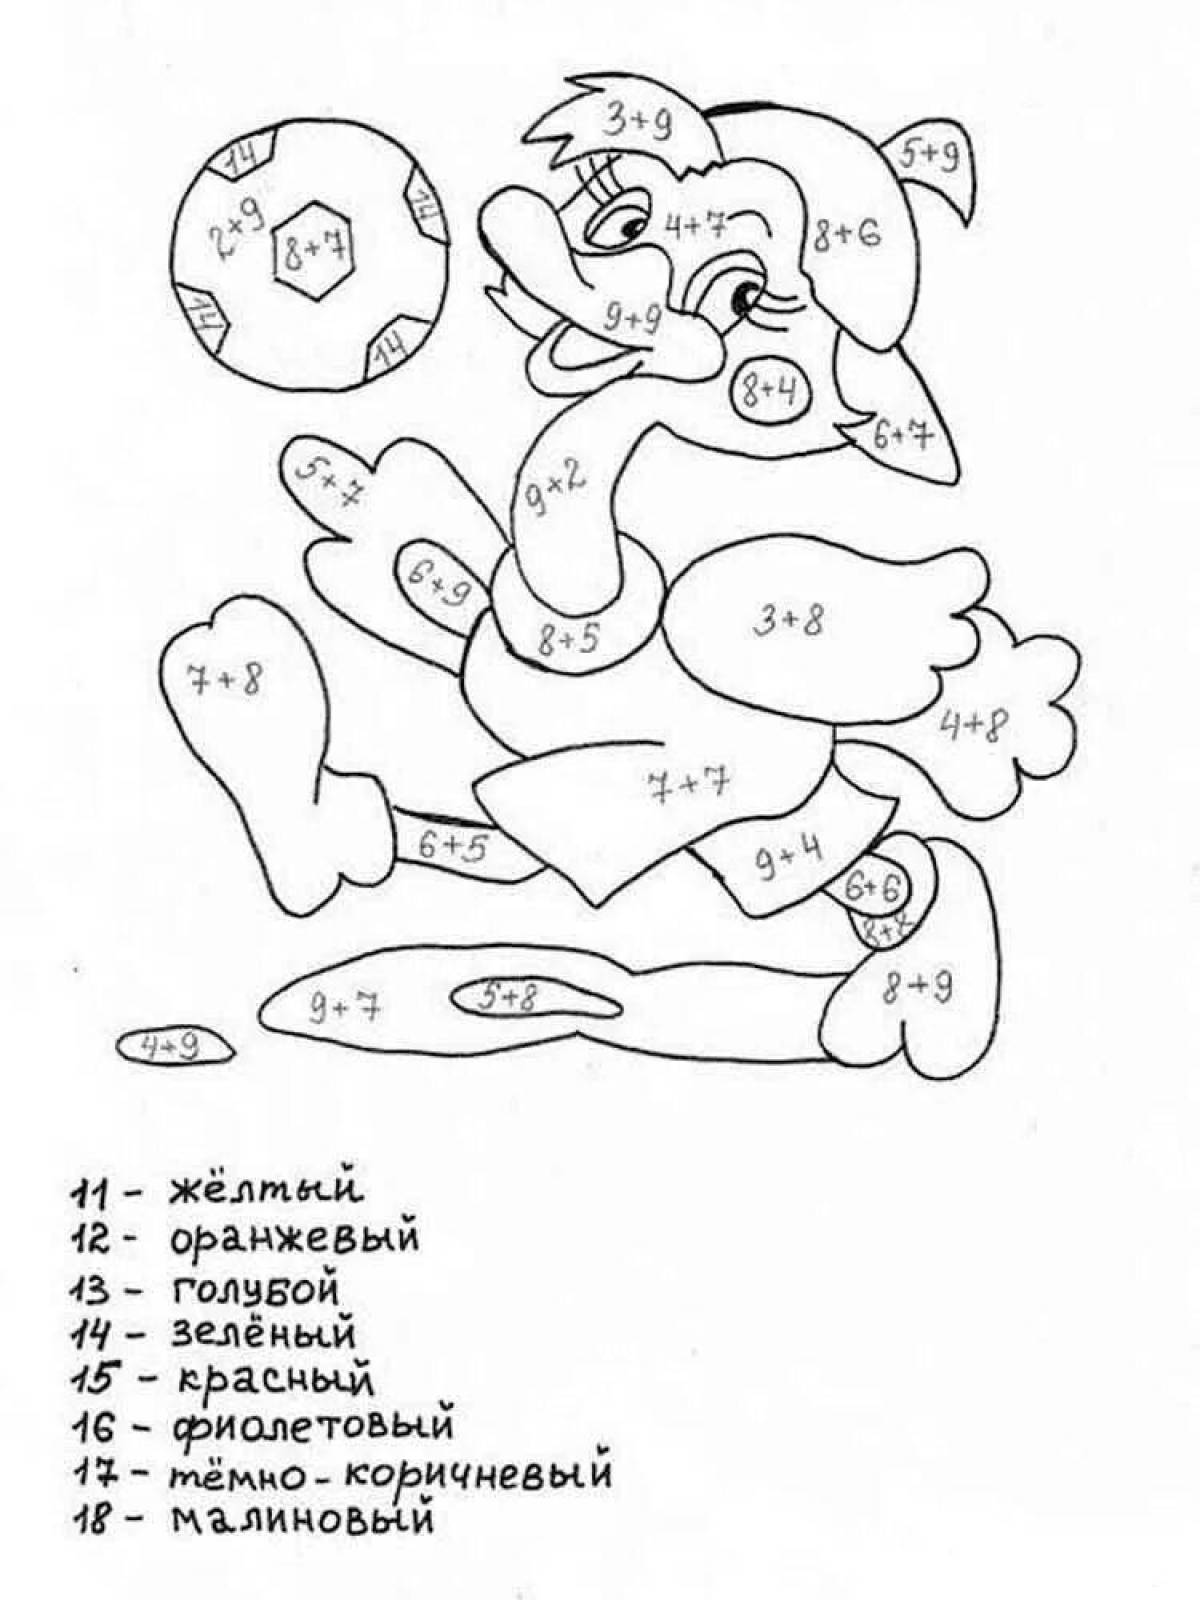 Example of original coloring page